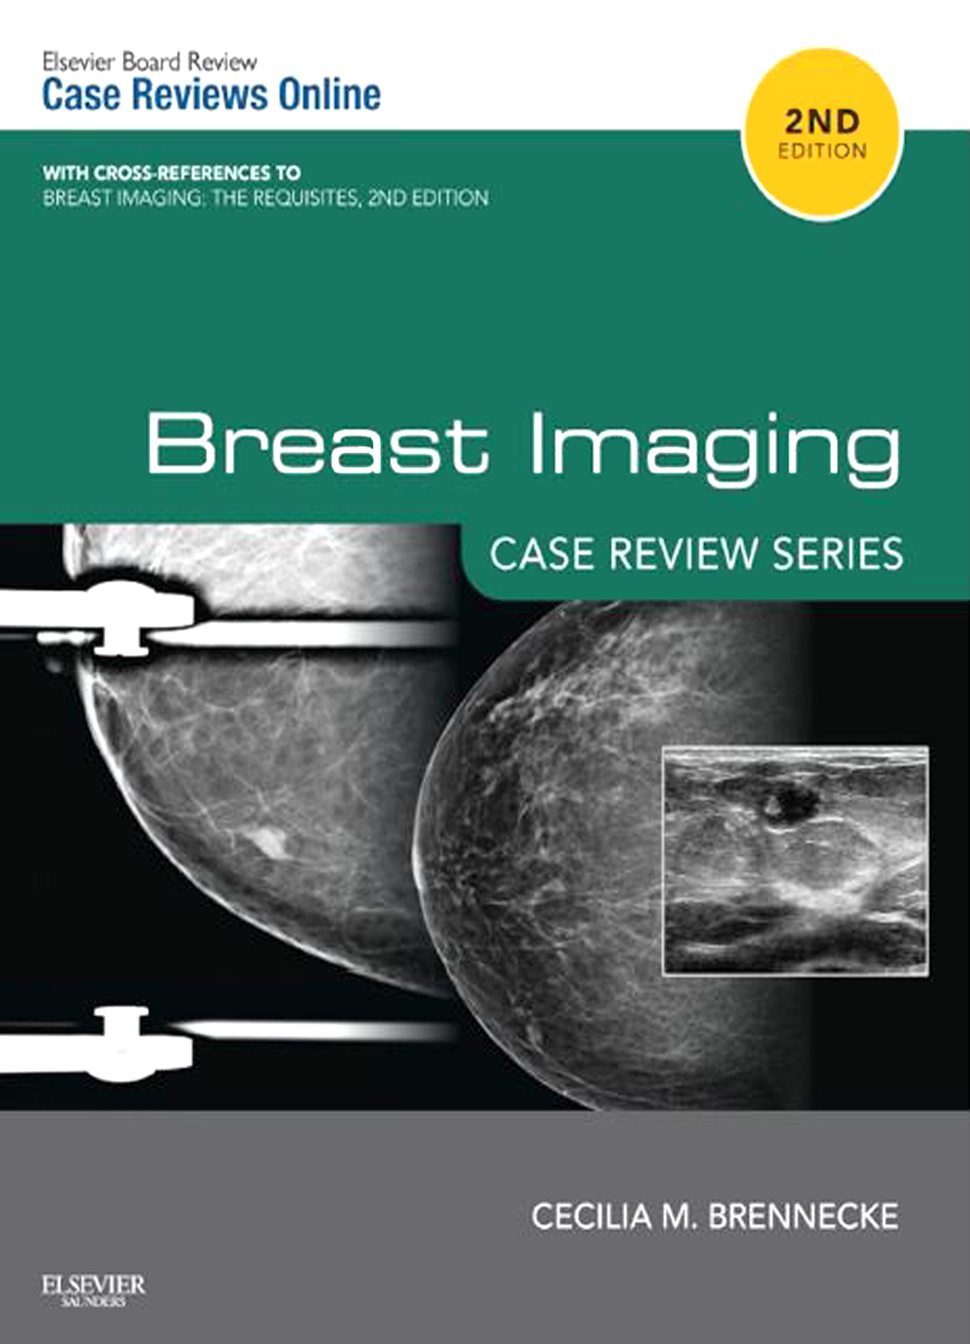 Breast Imaging Case Review Series E Book And Test Scrubs Continuing